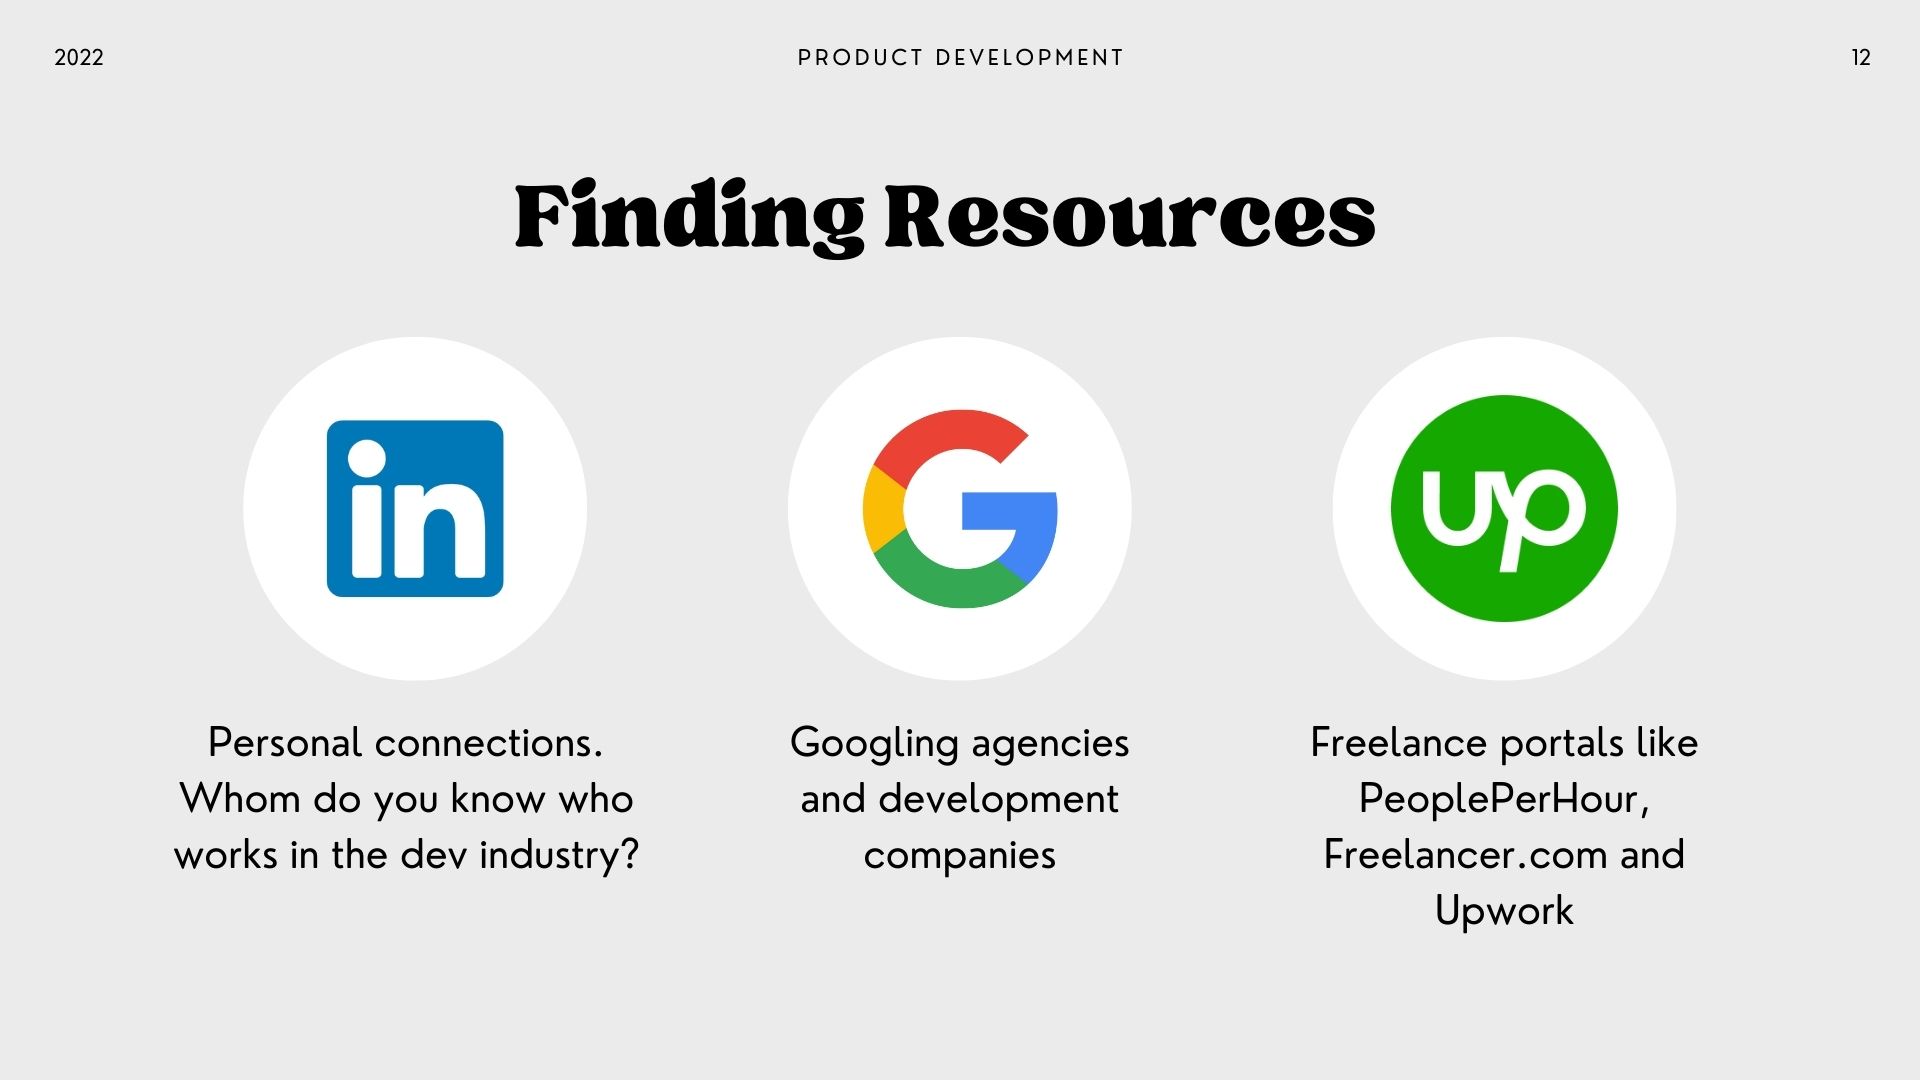 An image showing logos for LinkedIn, Google and Upwork for finding resources such as developers